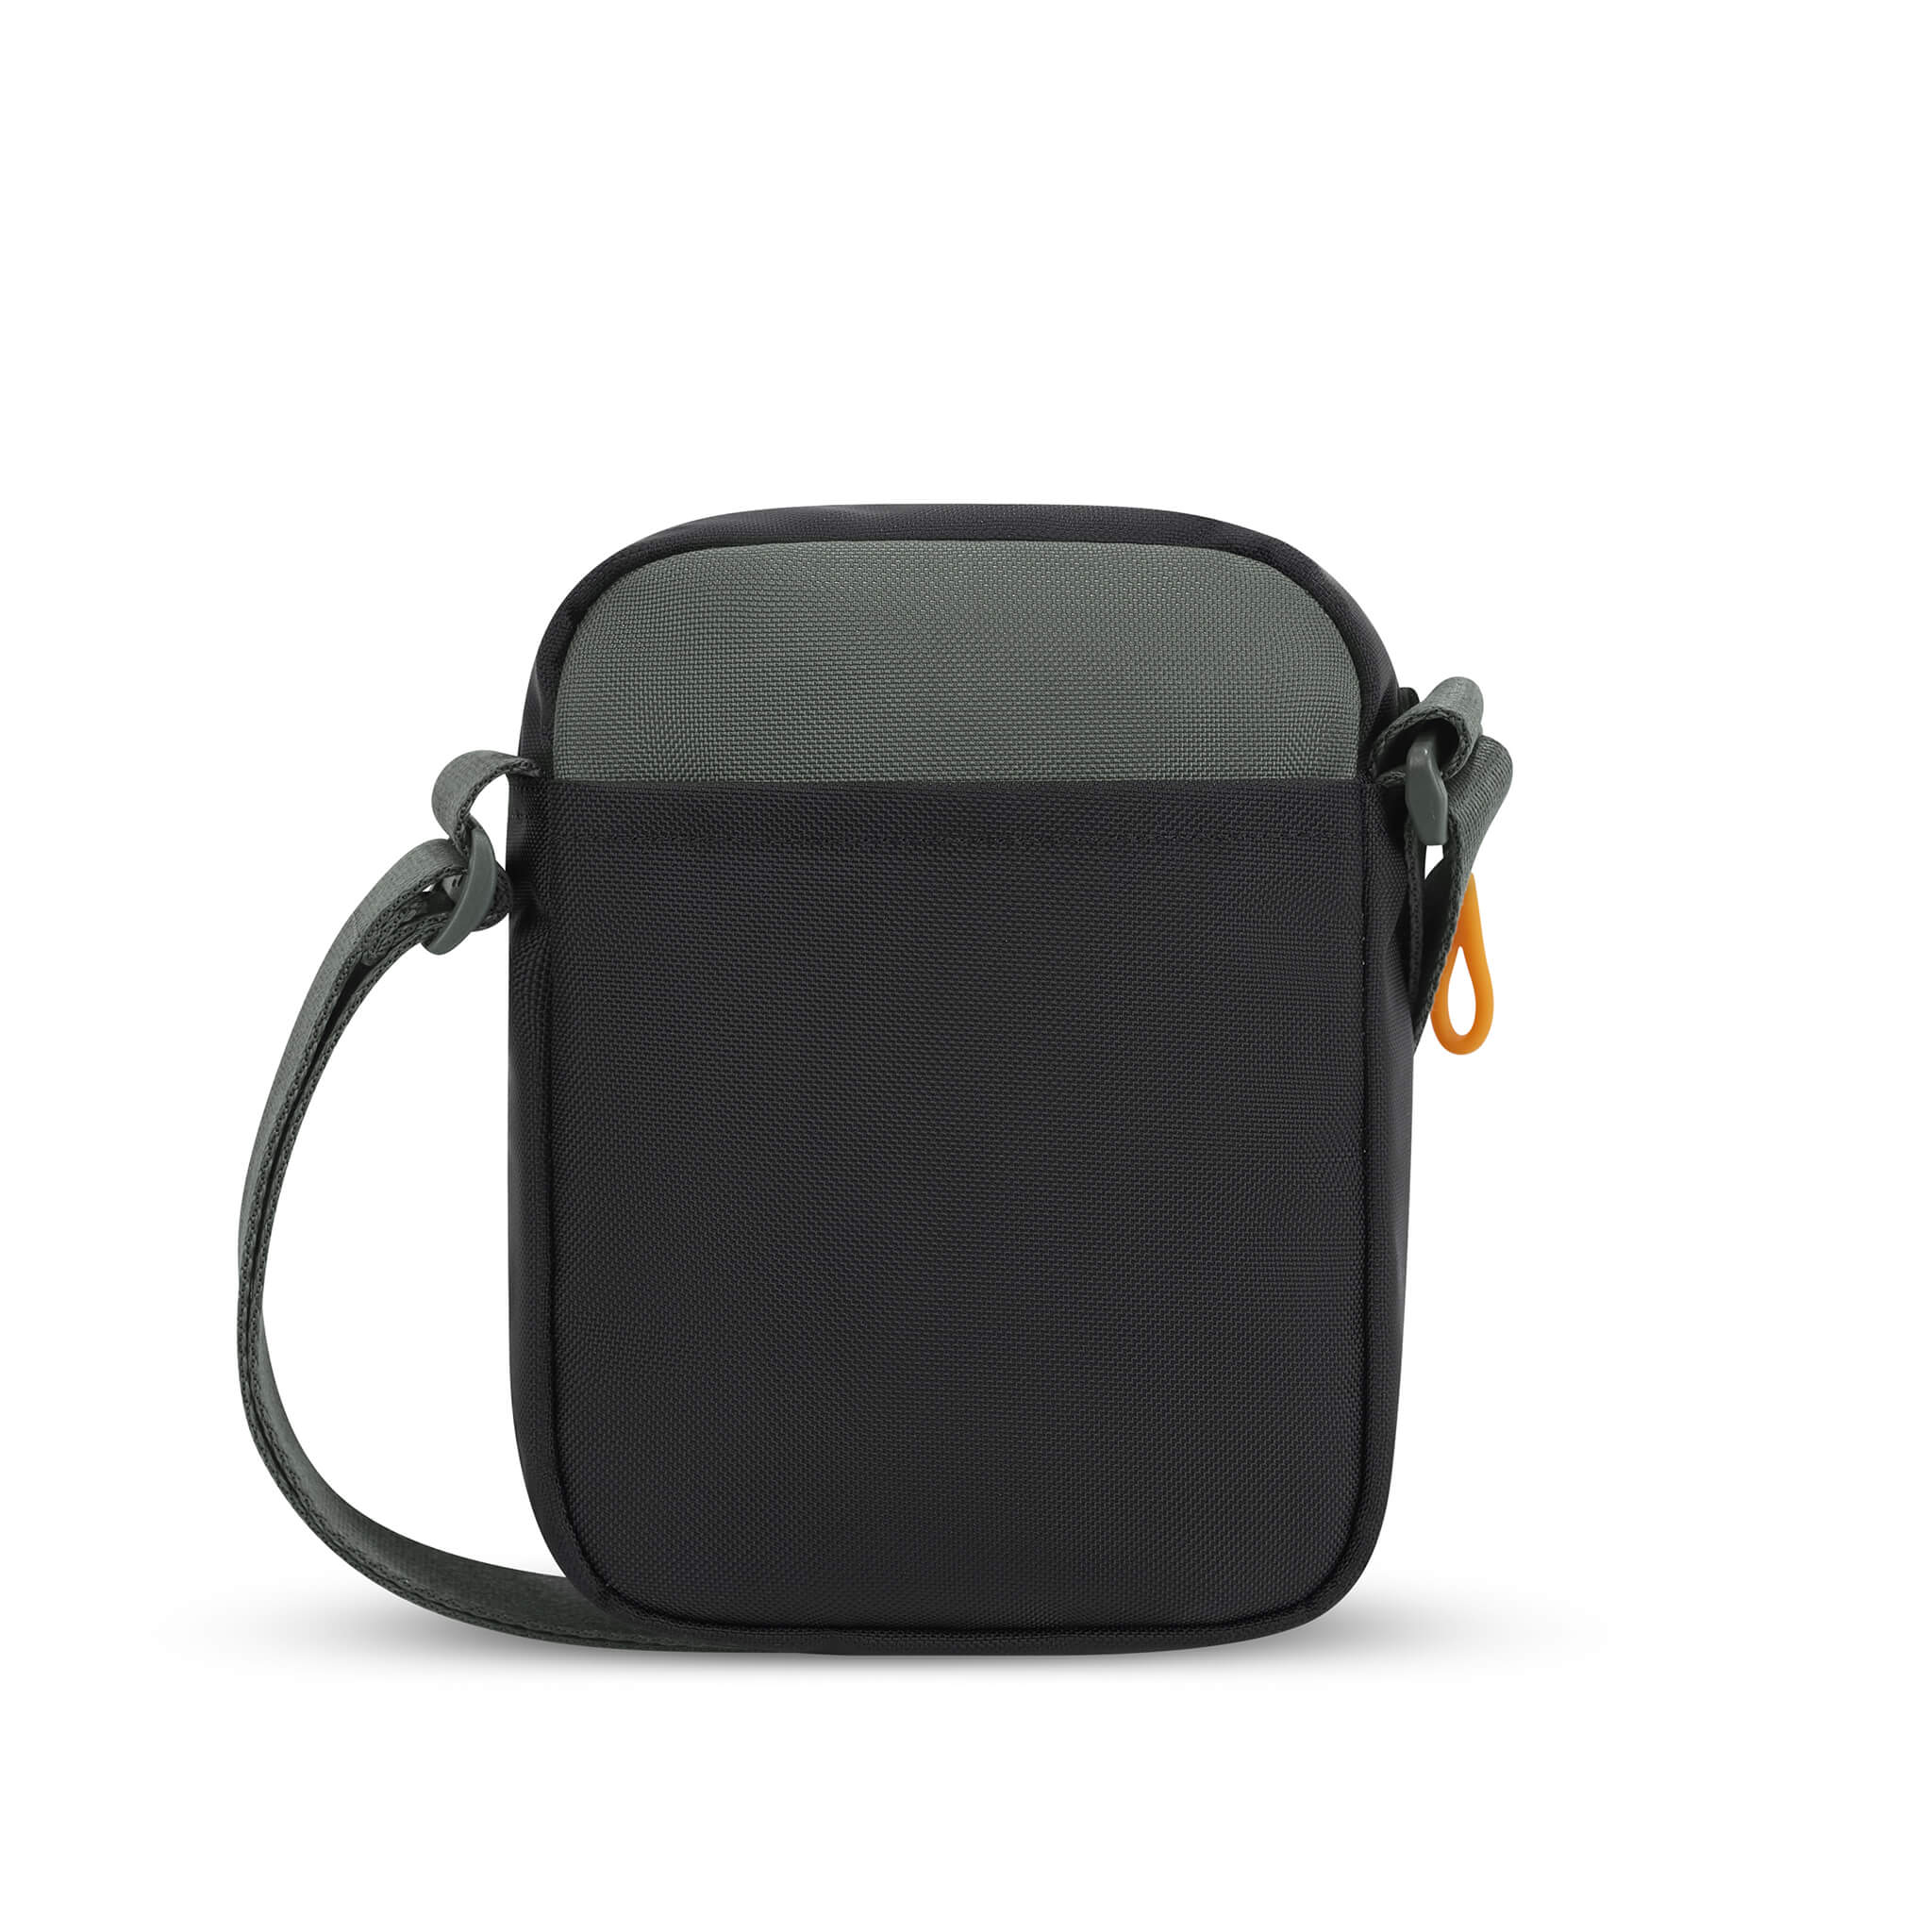 Back view of Sherpani mini crossbody purse, the Rogue in Juniper. Rogue features include an adjustable crossbody strap, detachable keychain, compact design, minimalist bag, RFID protection and back slip pocket. The Juniper color is two-toned in black and gray with yellow accents.